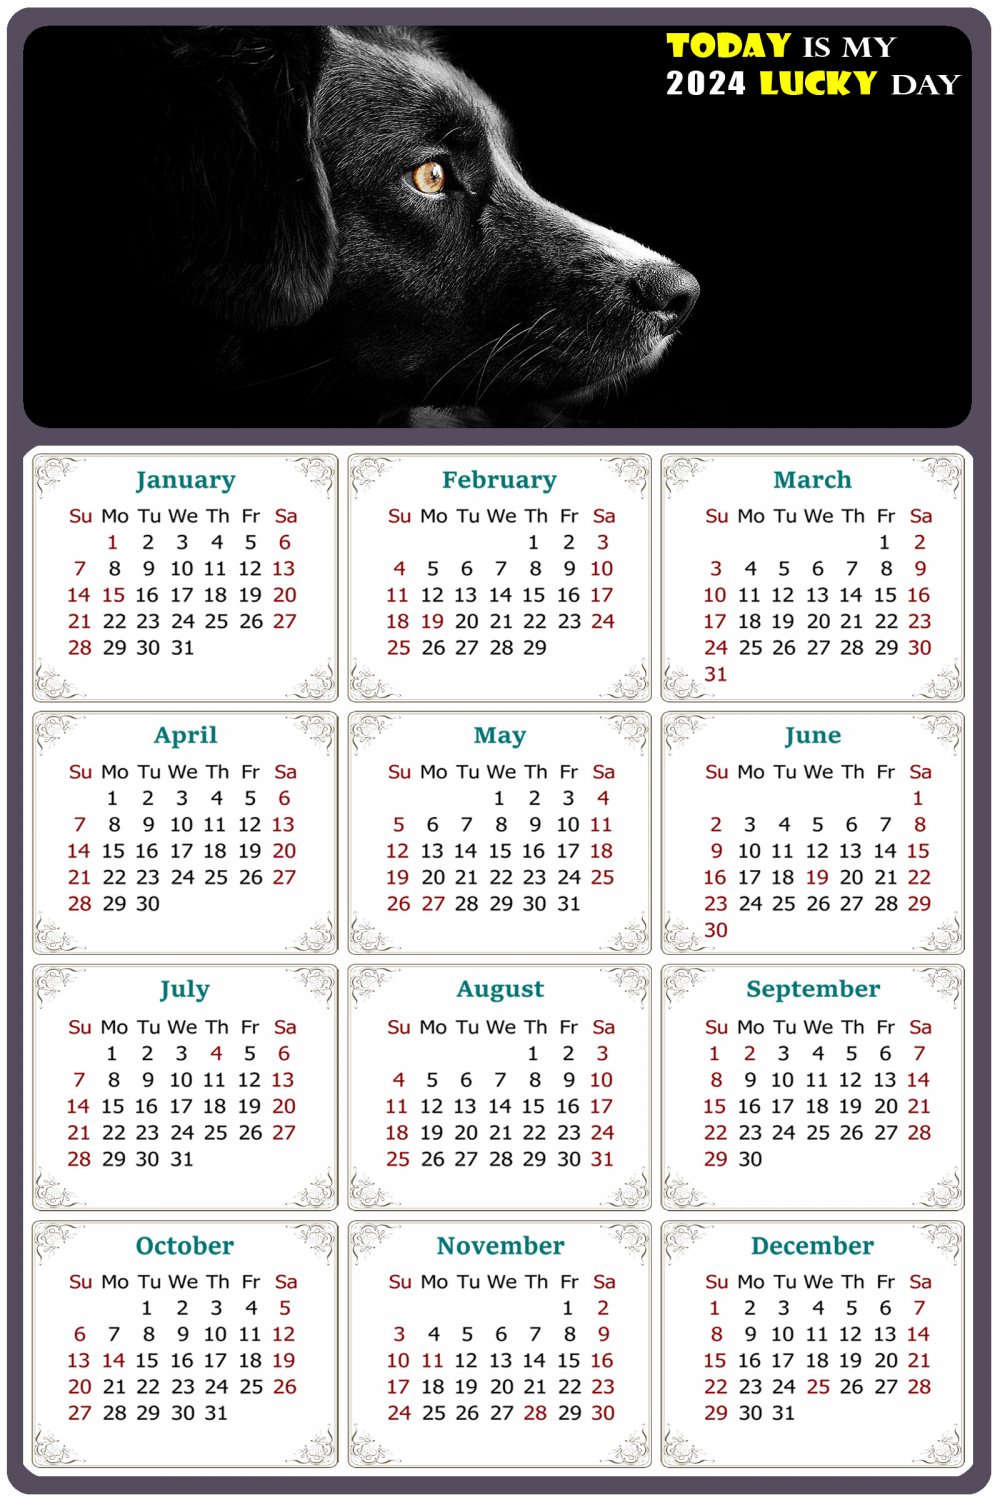 2024 Magnetic Calendar - Today is My Lucky Day - Dogs Themed 011 (5.25 x 8)